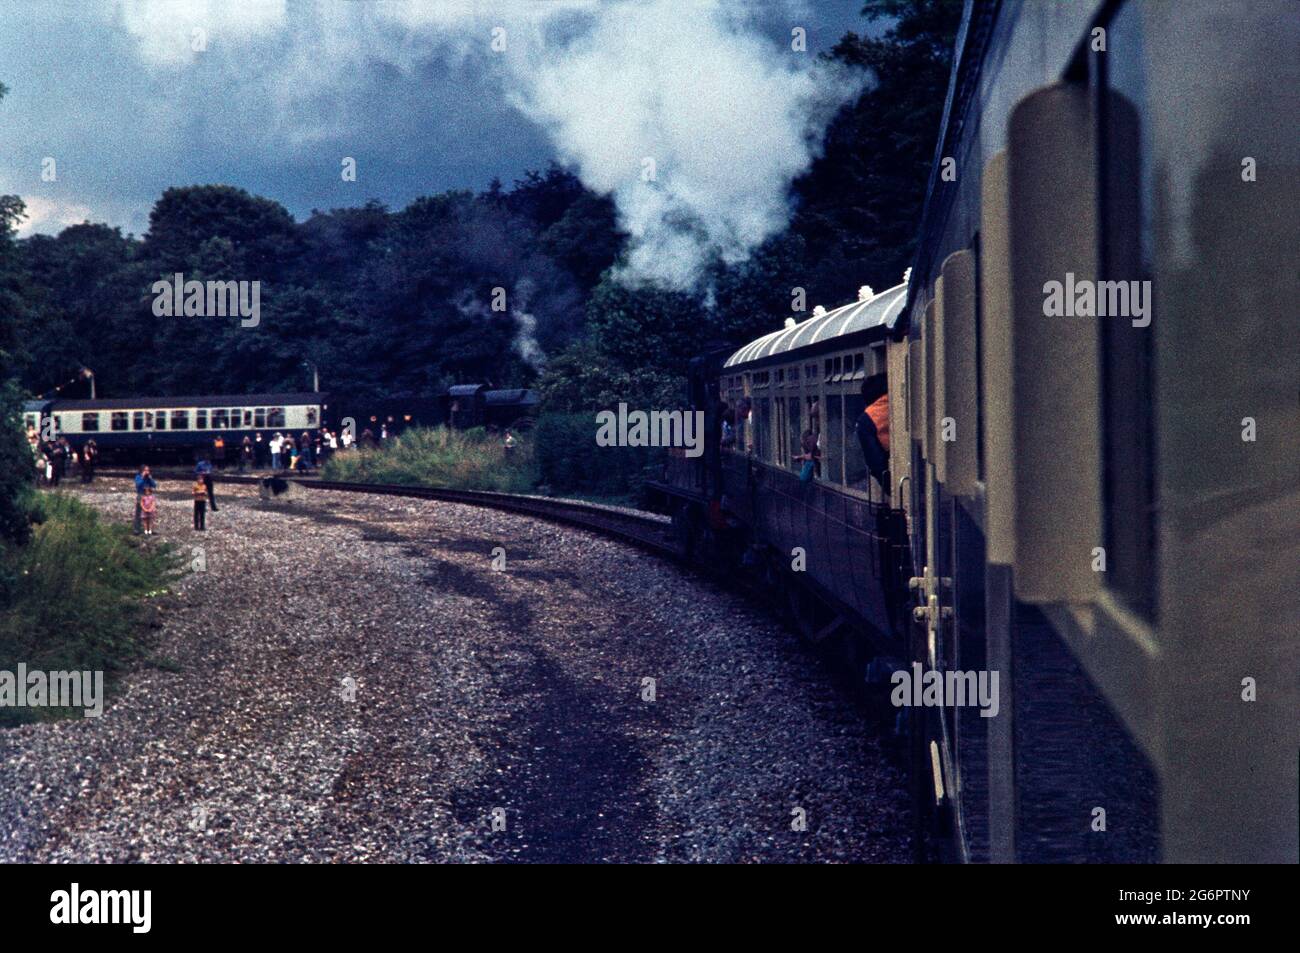 Train Spotting in the UK with a few buses circa 1975. Trains on the tracks and in the station, these are vintate trains/steam trains Stock Photo